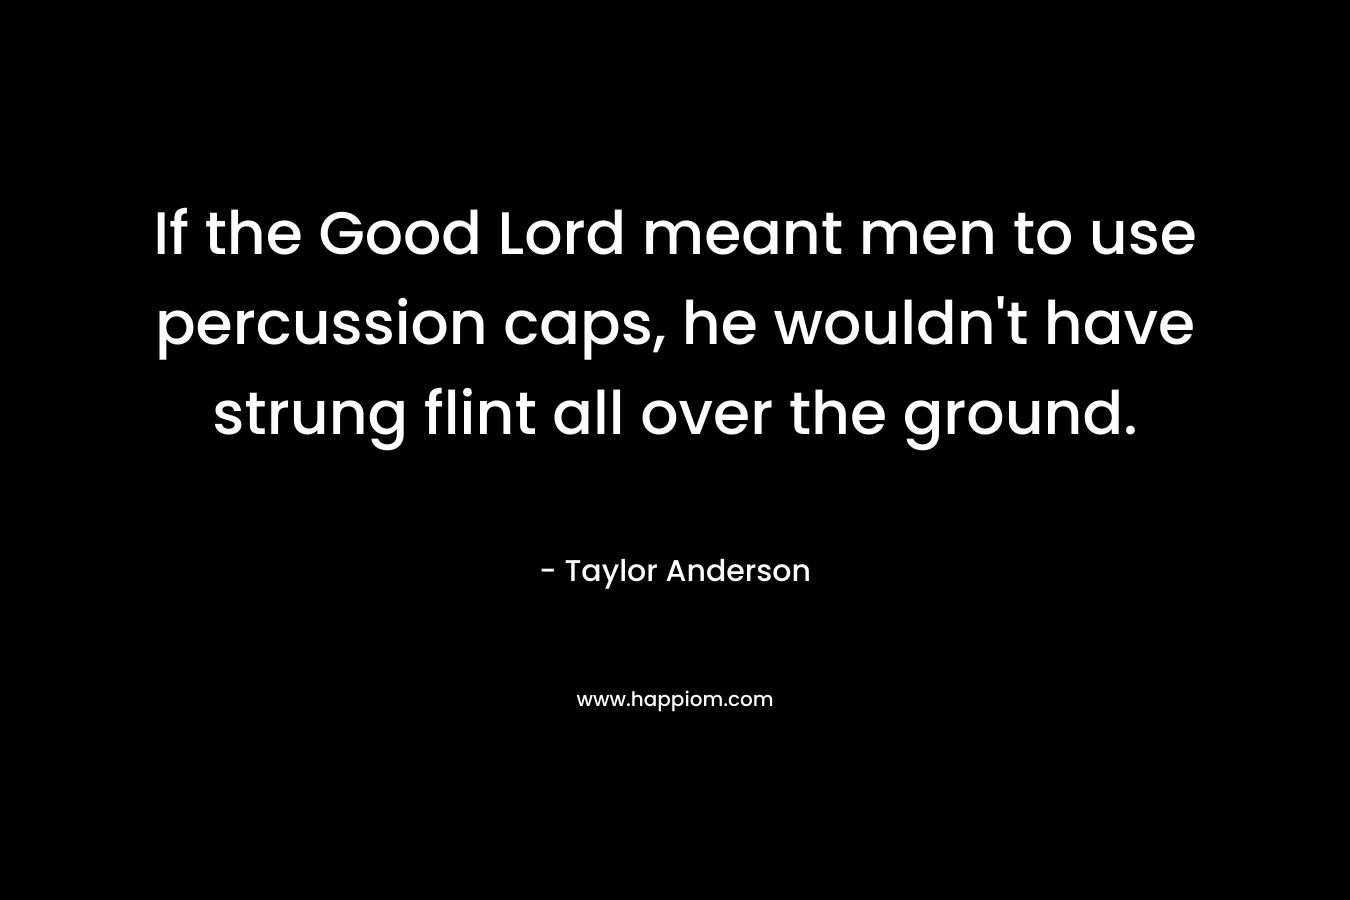 If the Good Lord meant men to use percussion caps, he wouldn’t have strung flint all over the ground. – Taylor Anderson